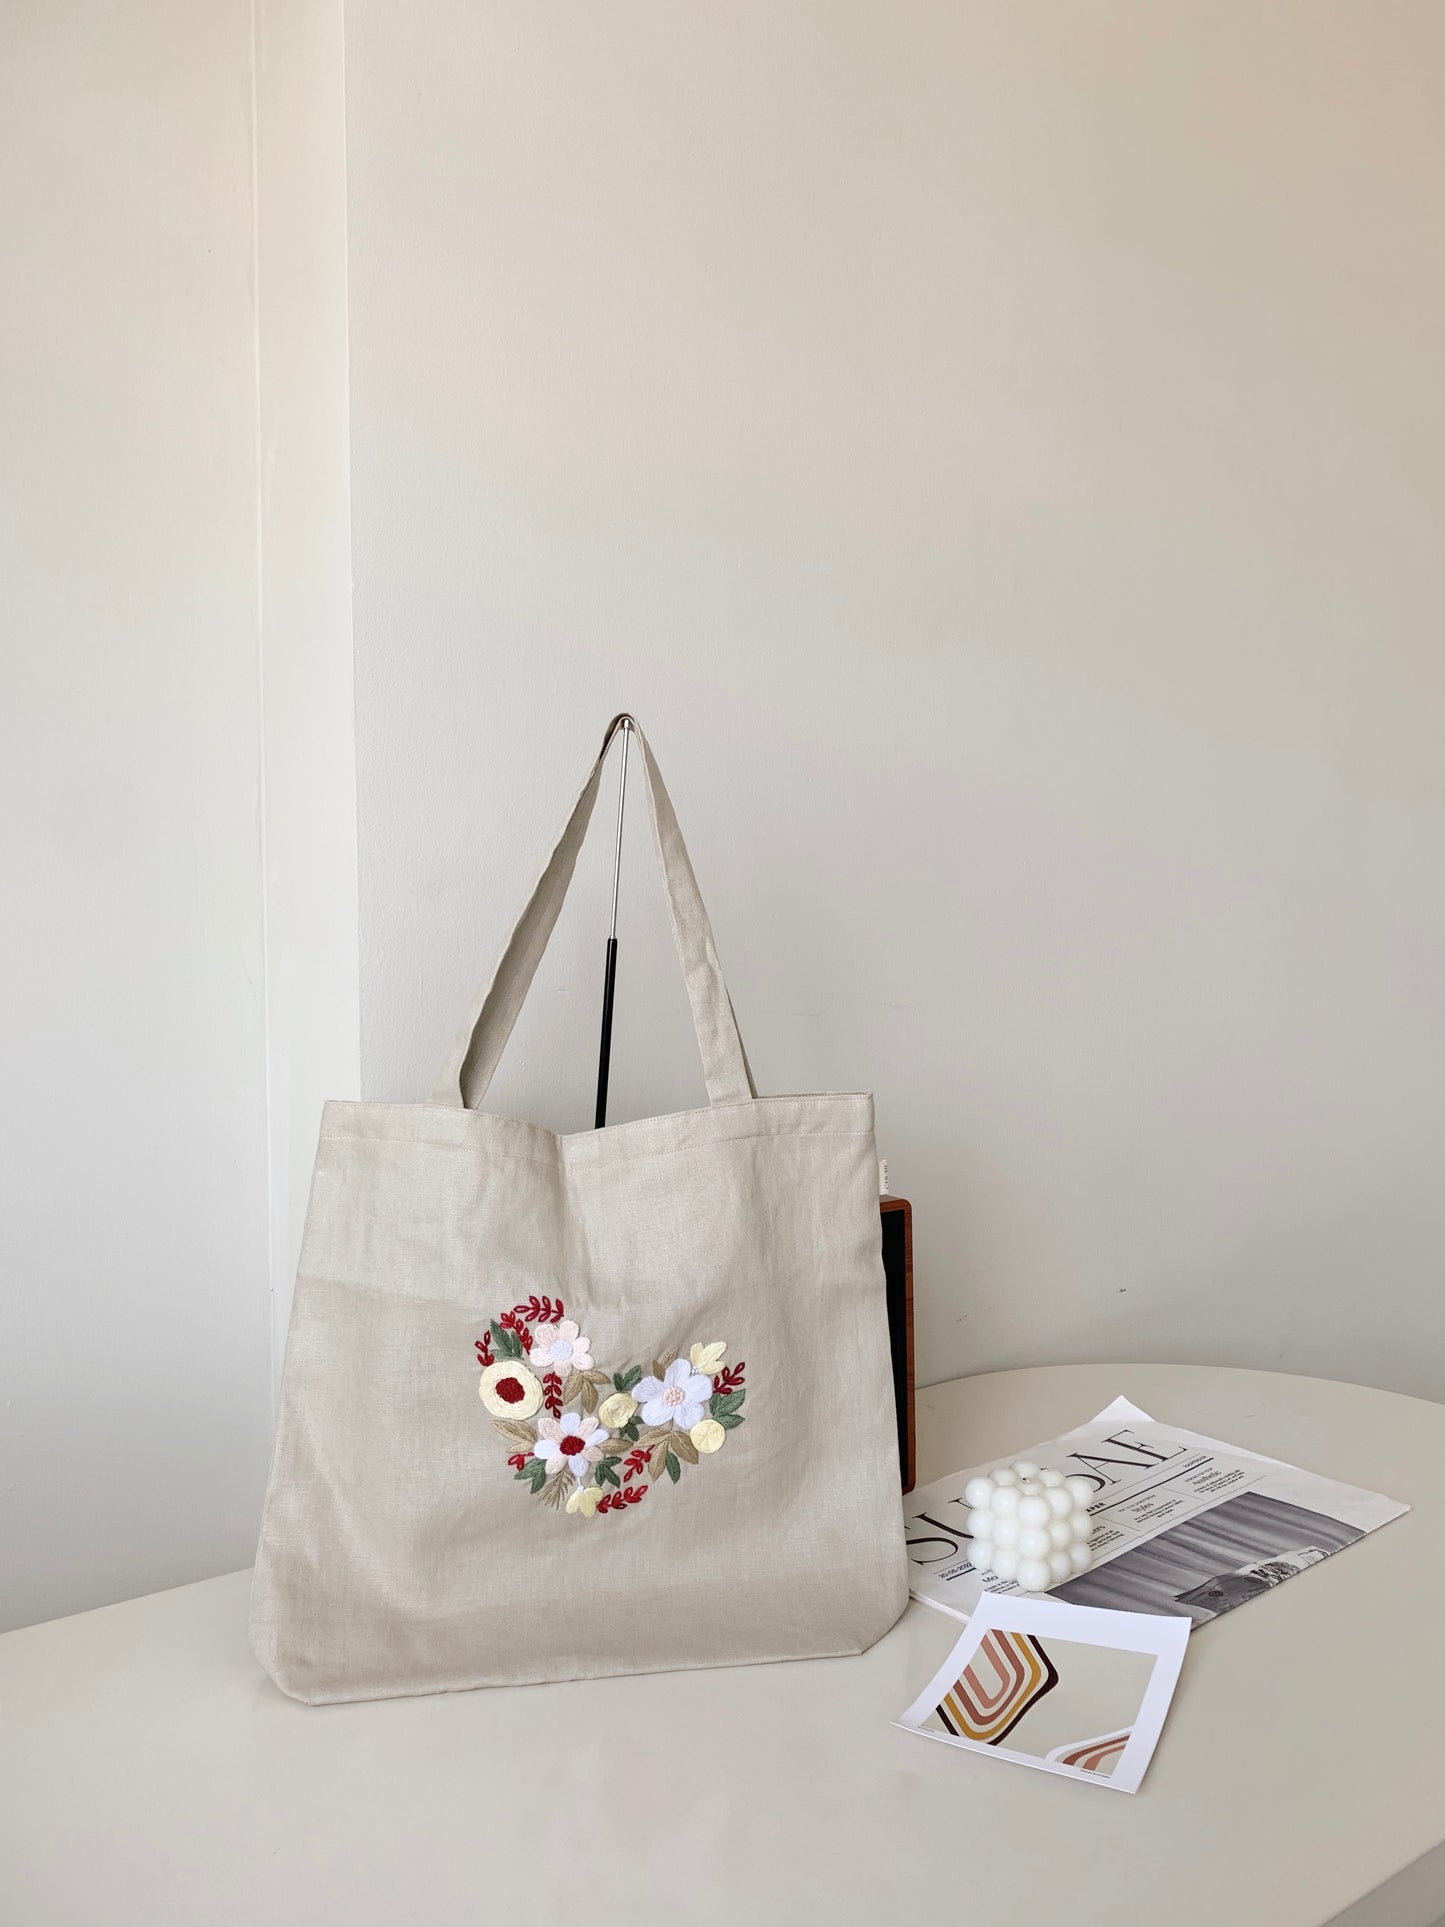 The Hand Embroidery Linen Canvas Tote Bag with Heart Floral Bouquet embroidery